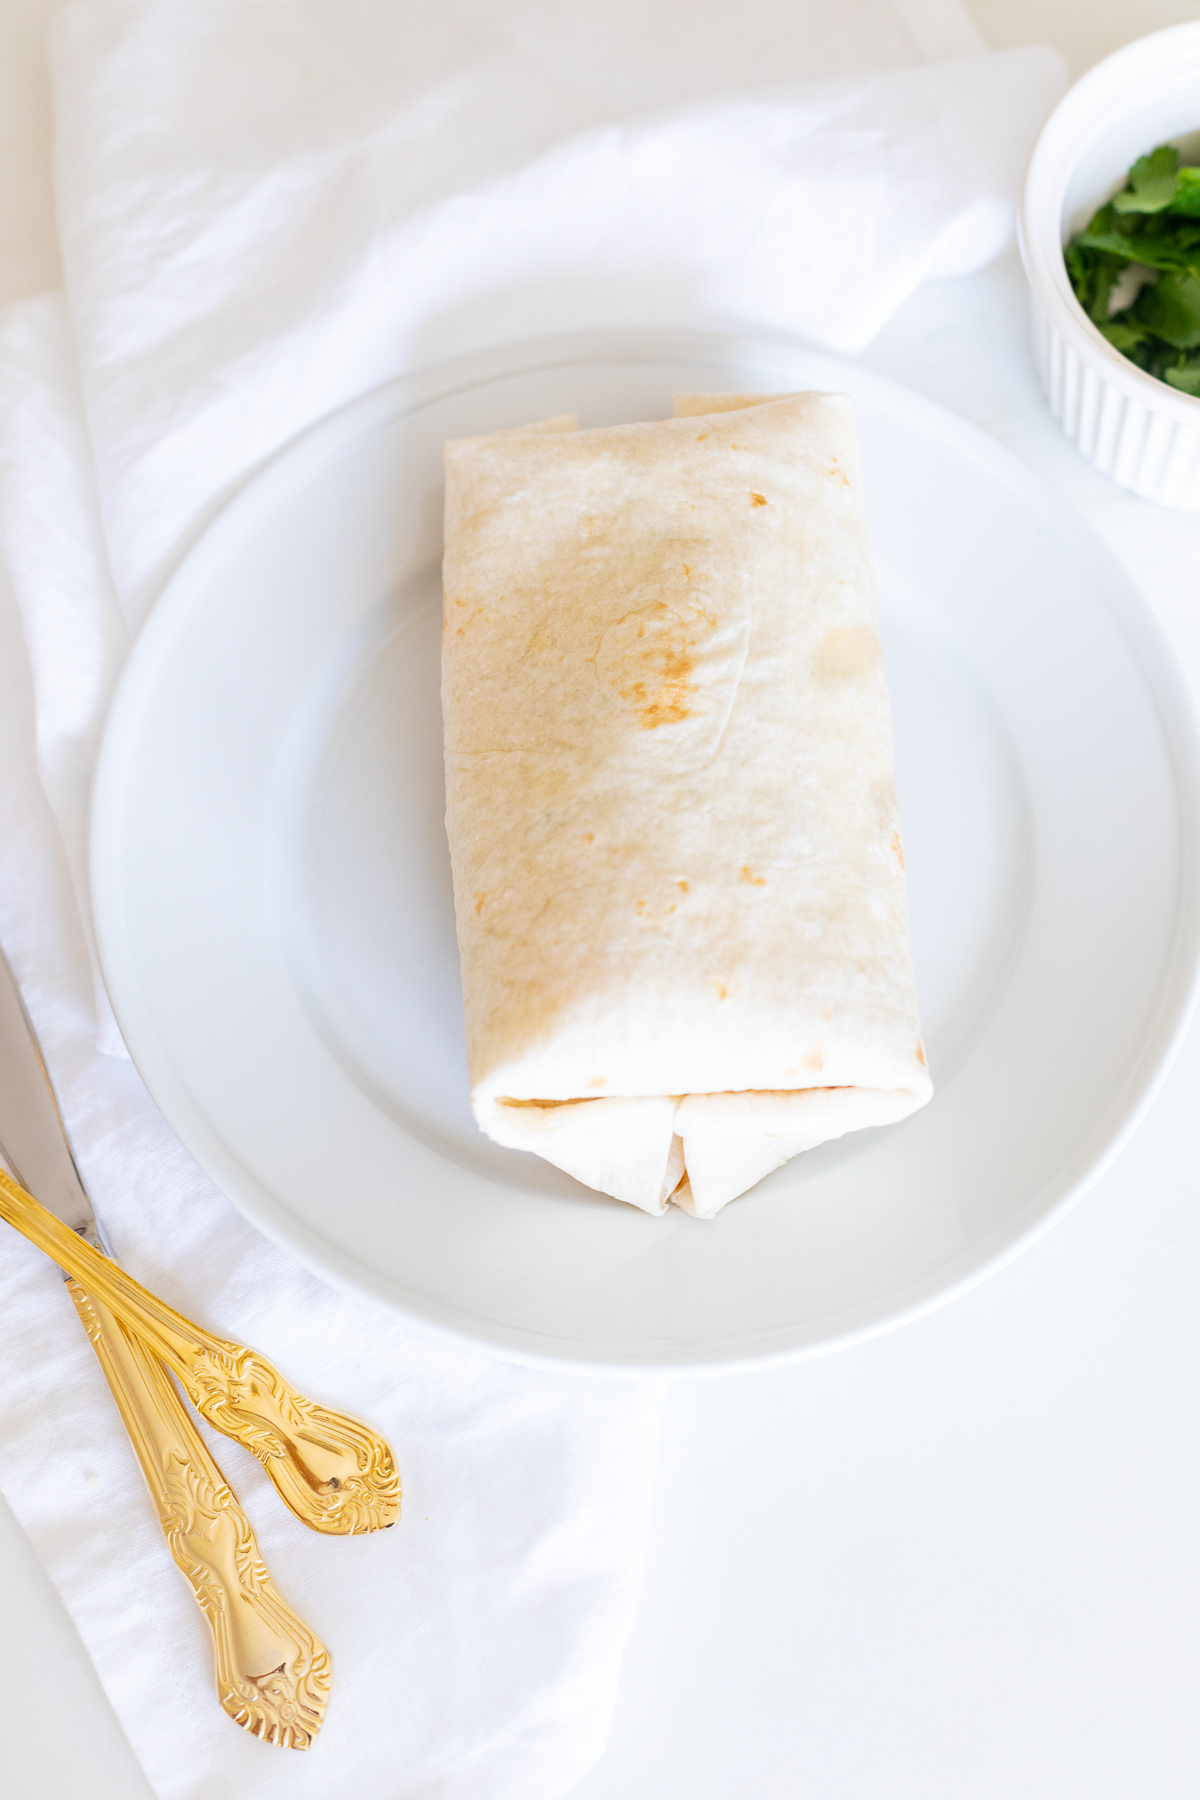 A chicken wrap on a white plate with gold silverware.